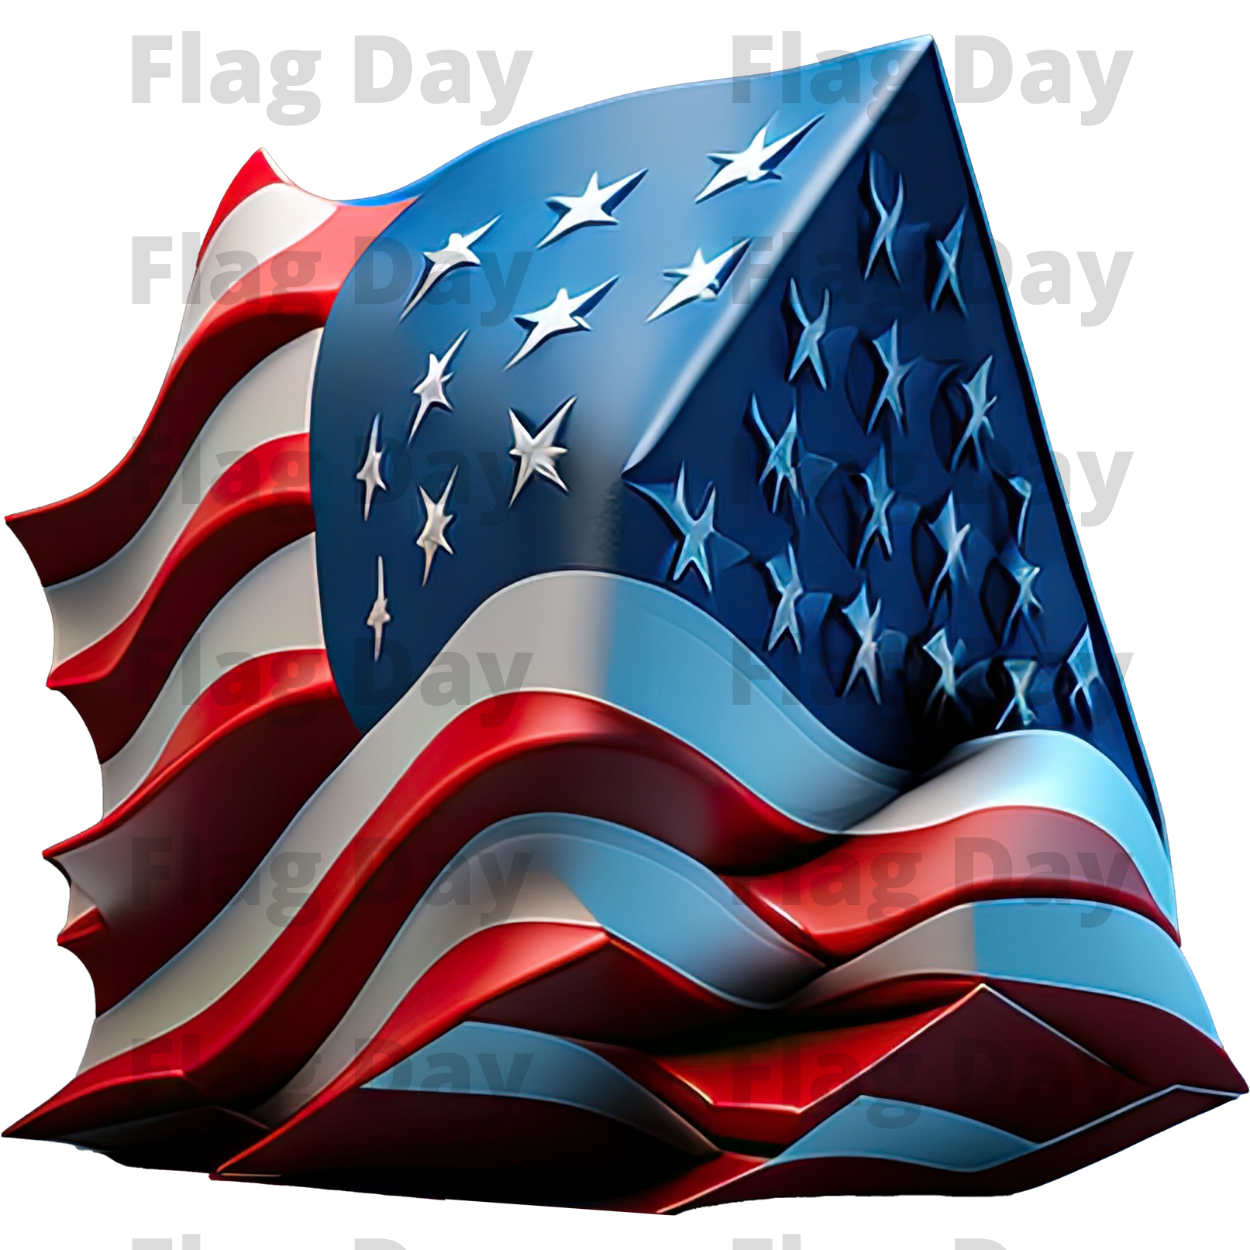 3D Toy American Flag